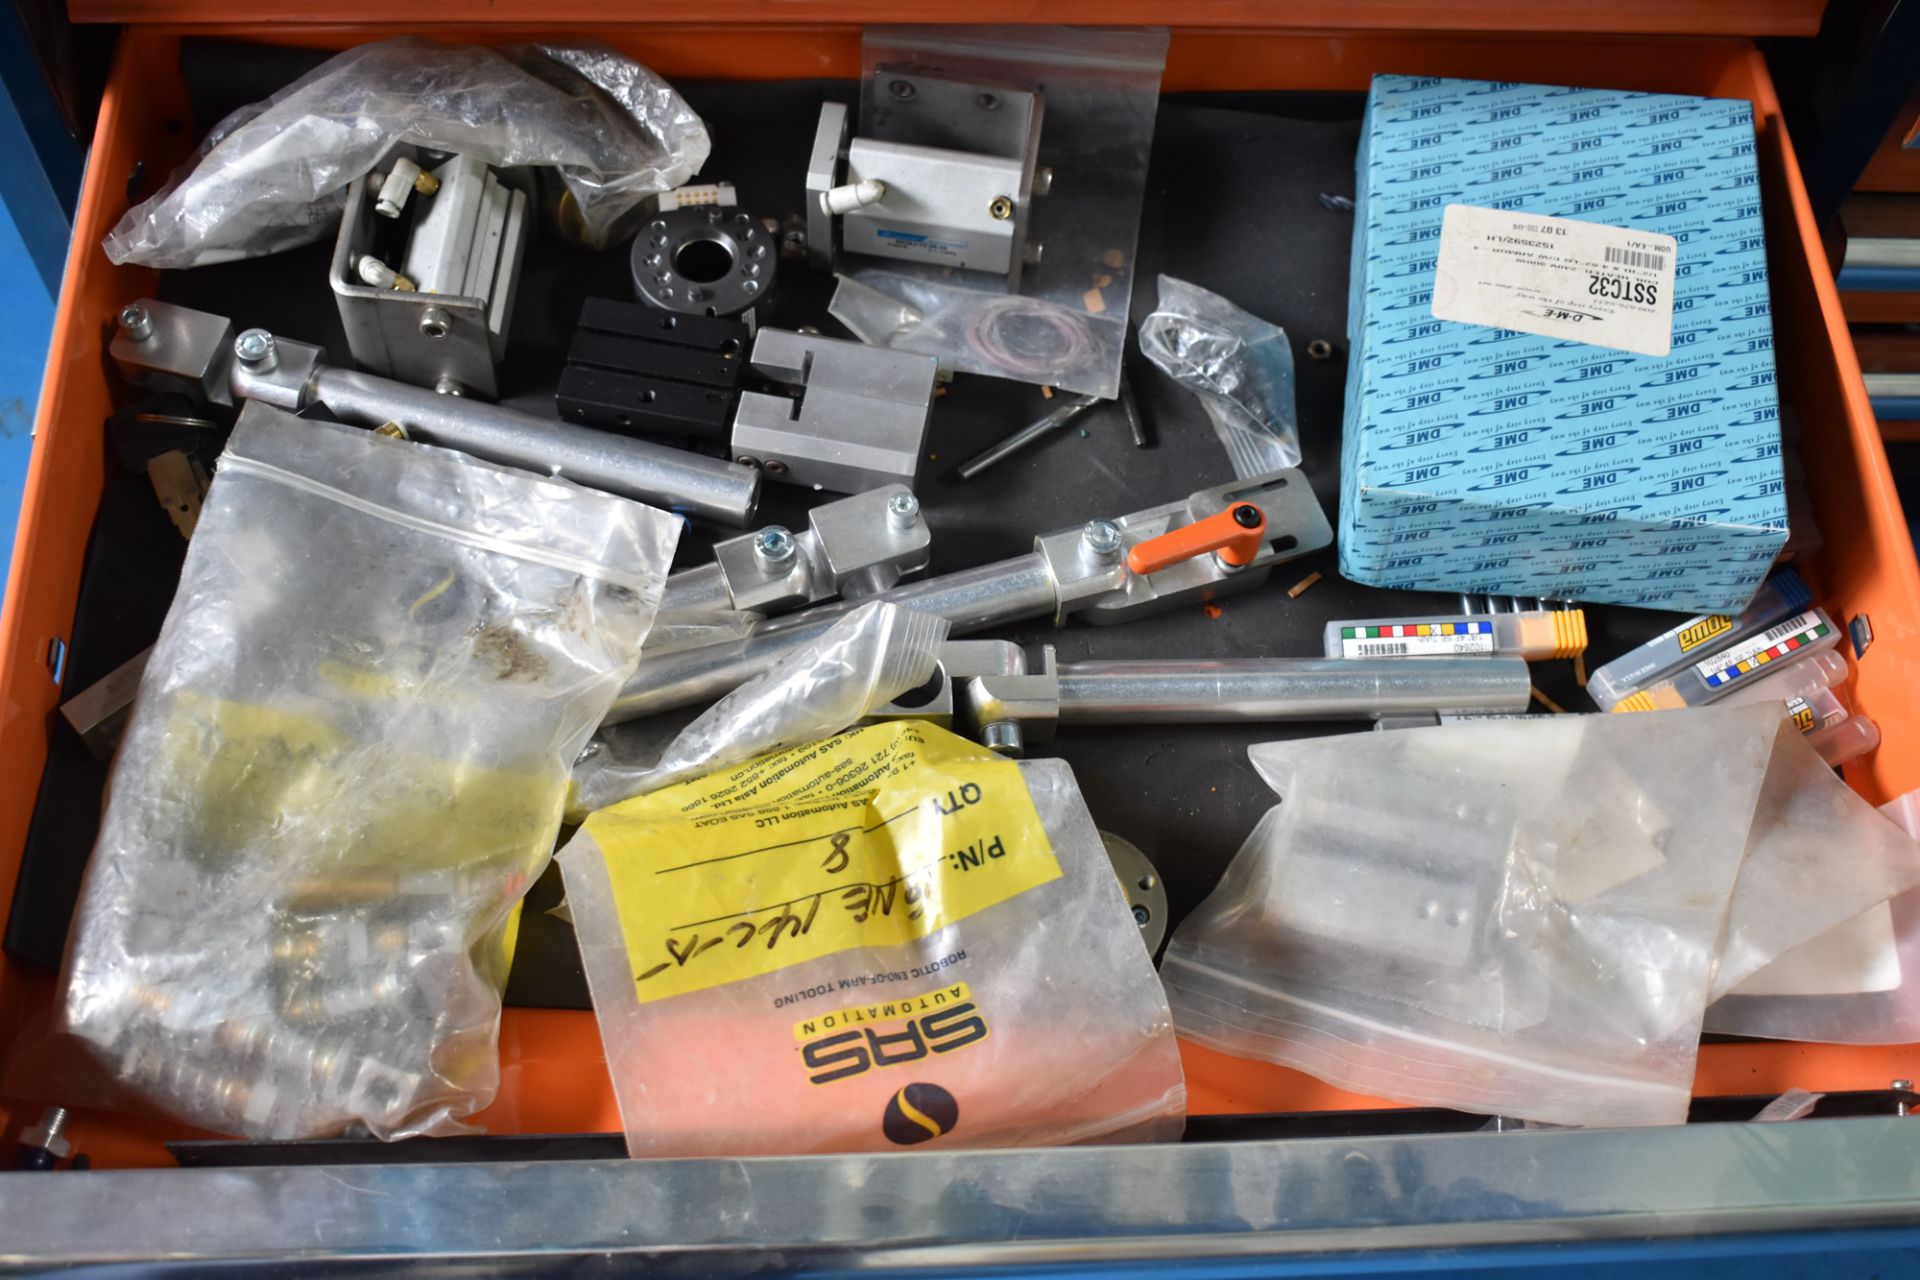 LOT/ DYNAMIC 8-DRAWER TOOL CHEST WITH LIEN FA INJECTION MOLDER SPARE PARTS & TOOLS - Image 4 of 6